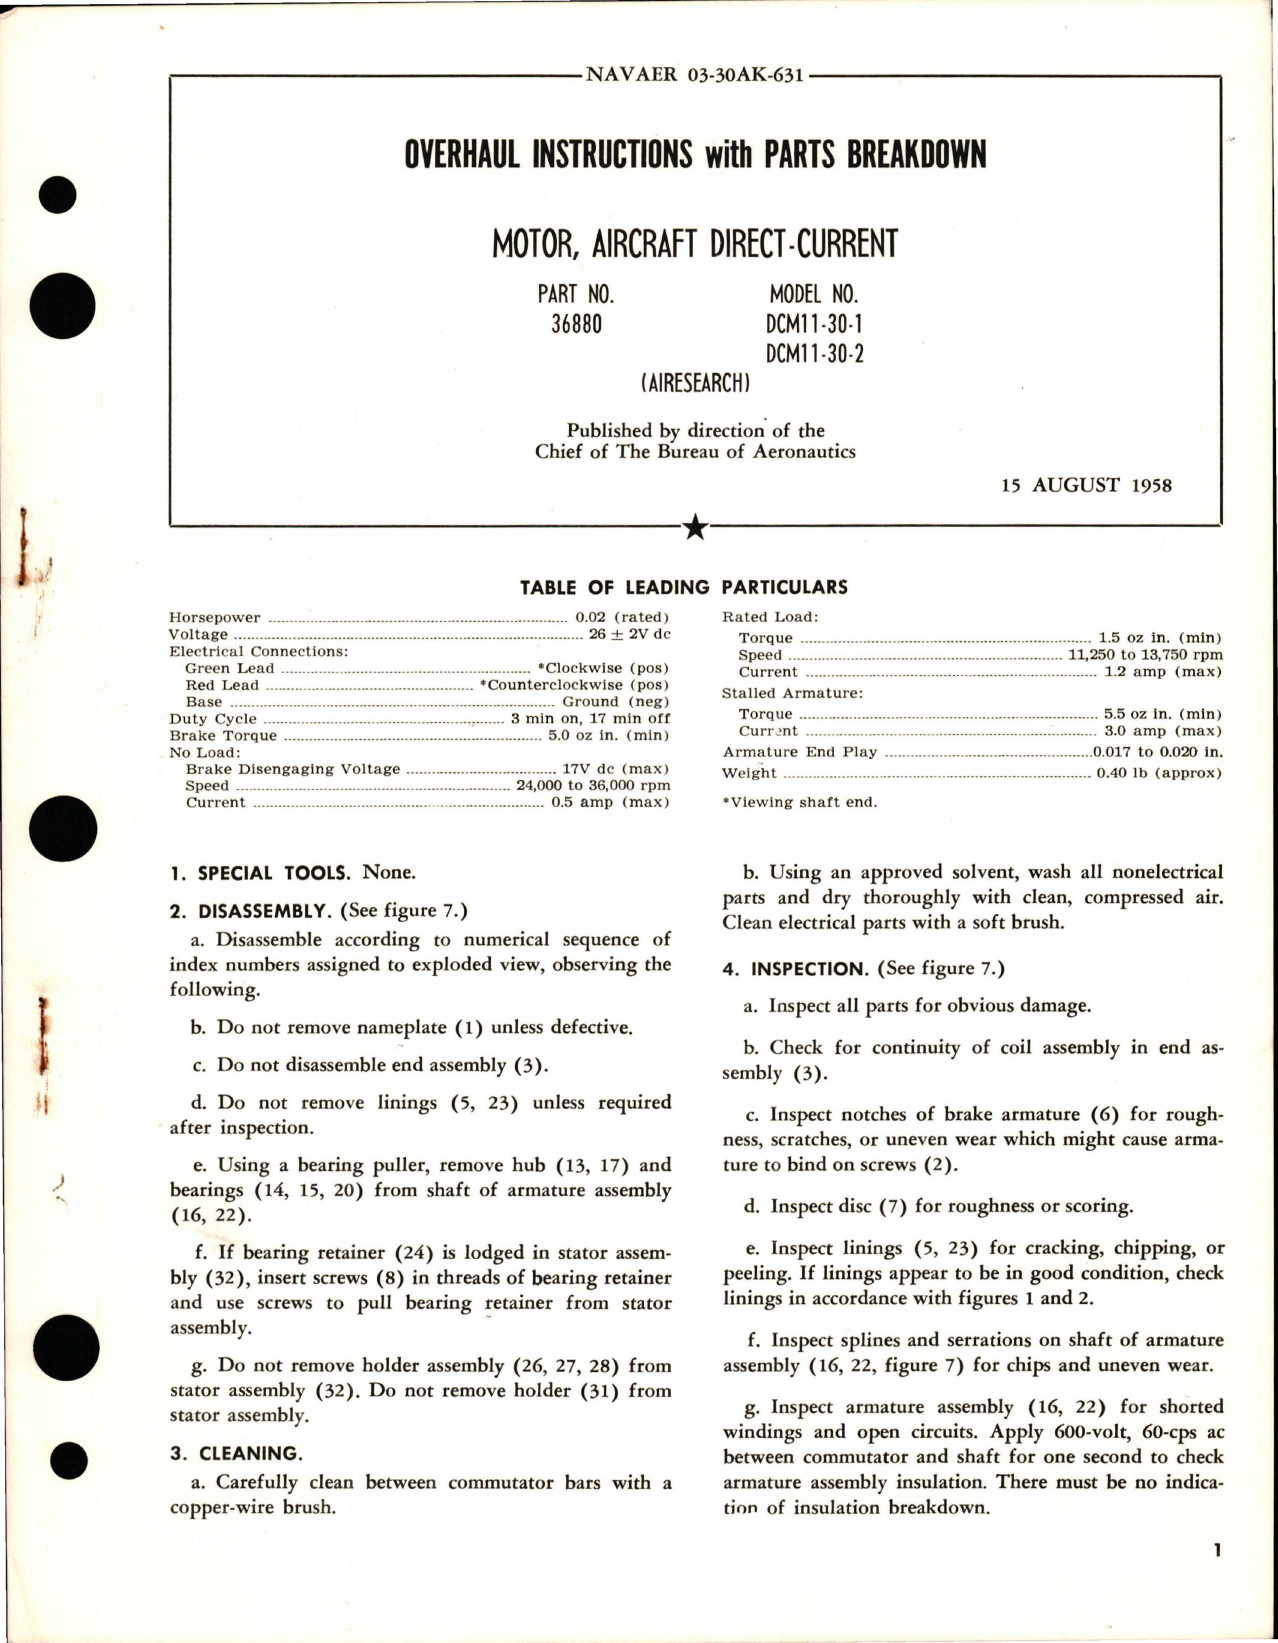 Sample page 1 from AirCorps Library document: Overhaul Instructions with Parts Breakdown for Direct-Current Motor - Part 36880 - Model DCM11-30-1 and DCM11-30-2 